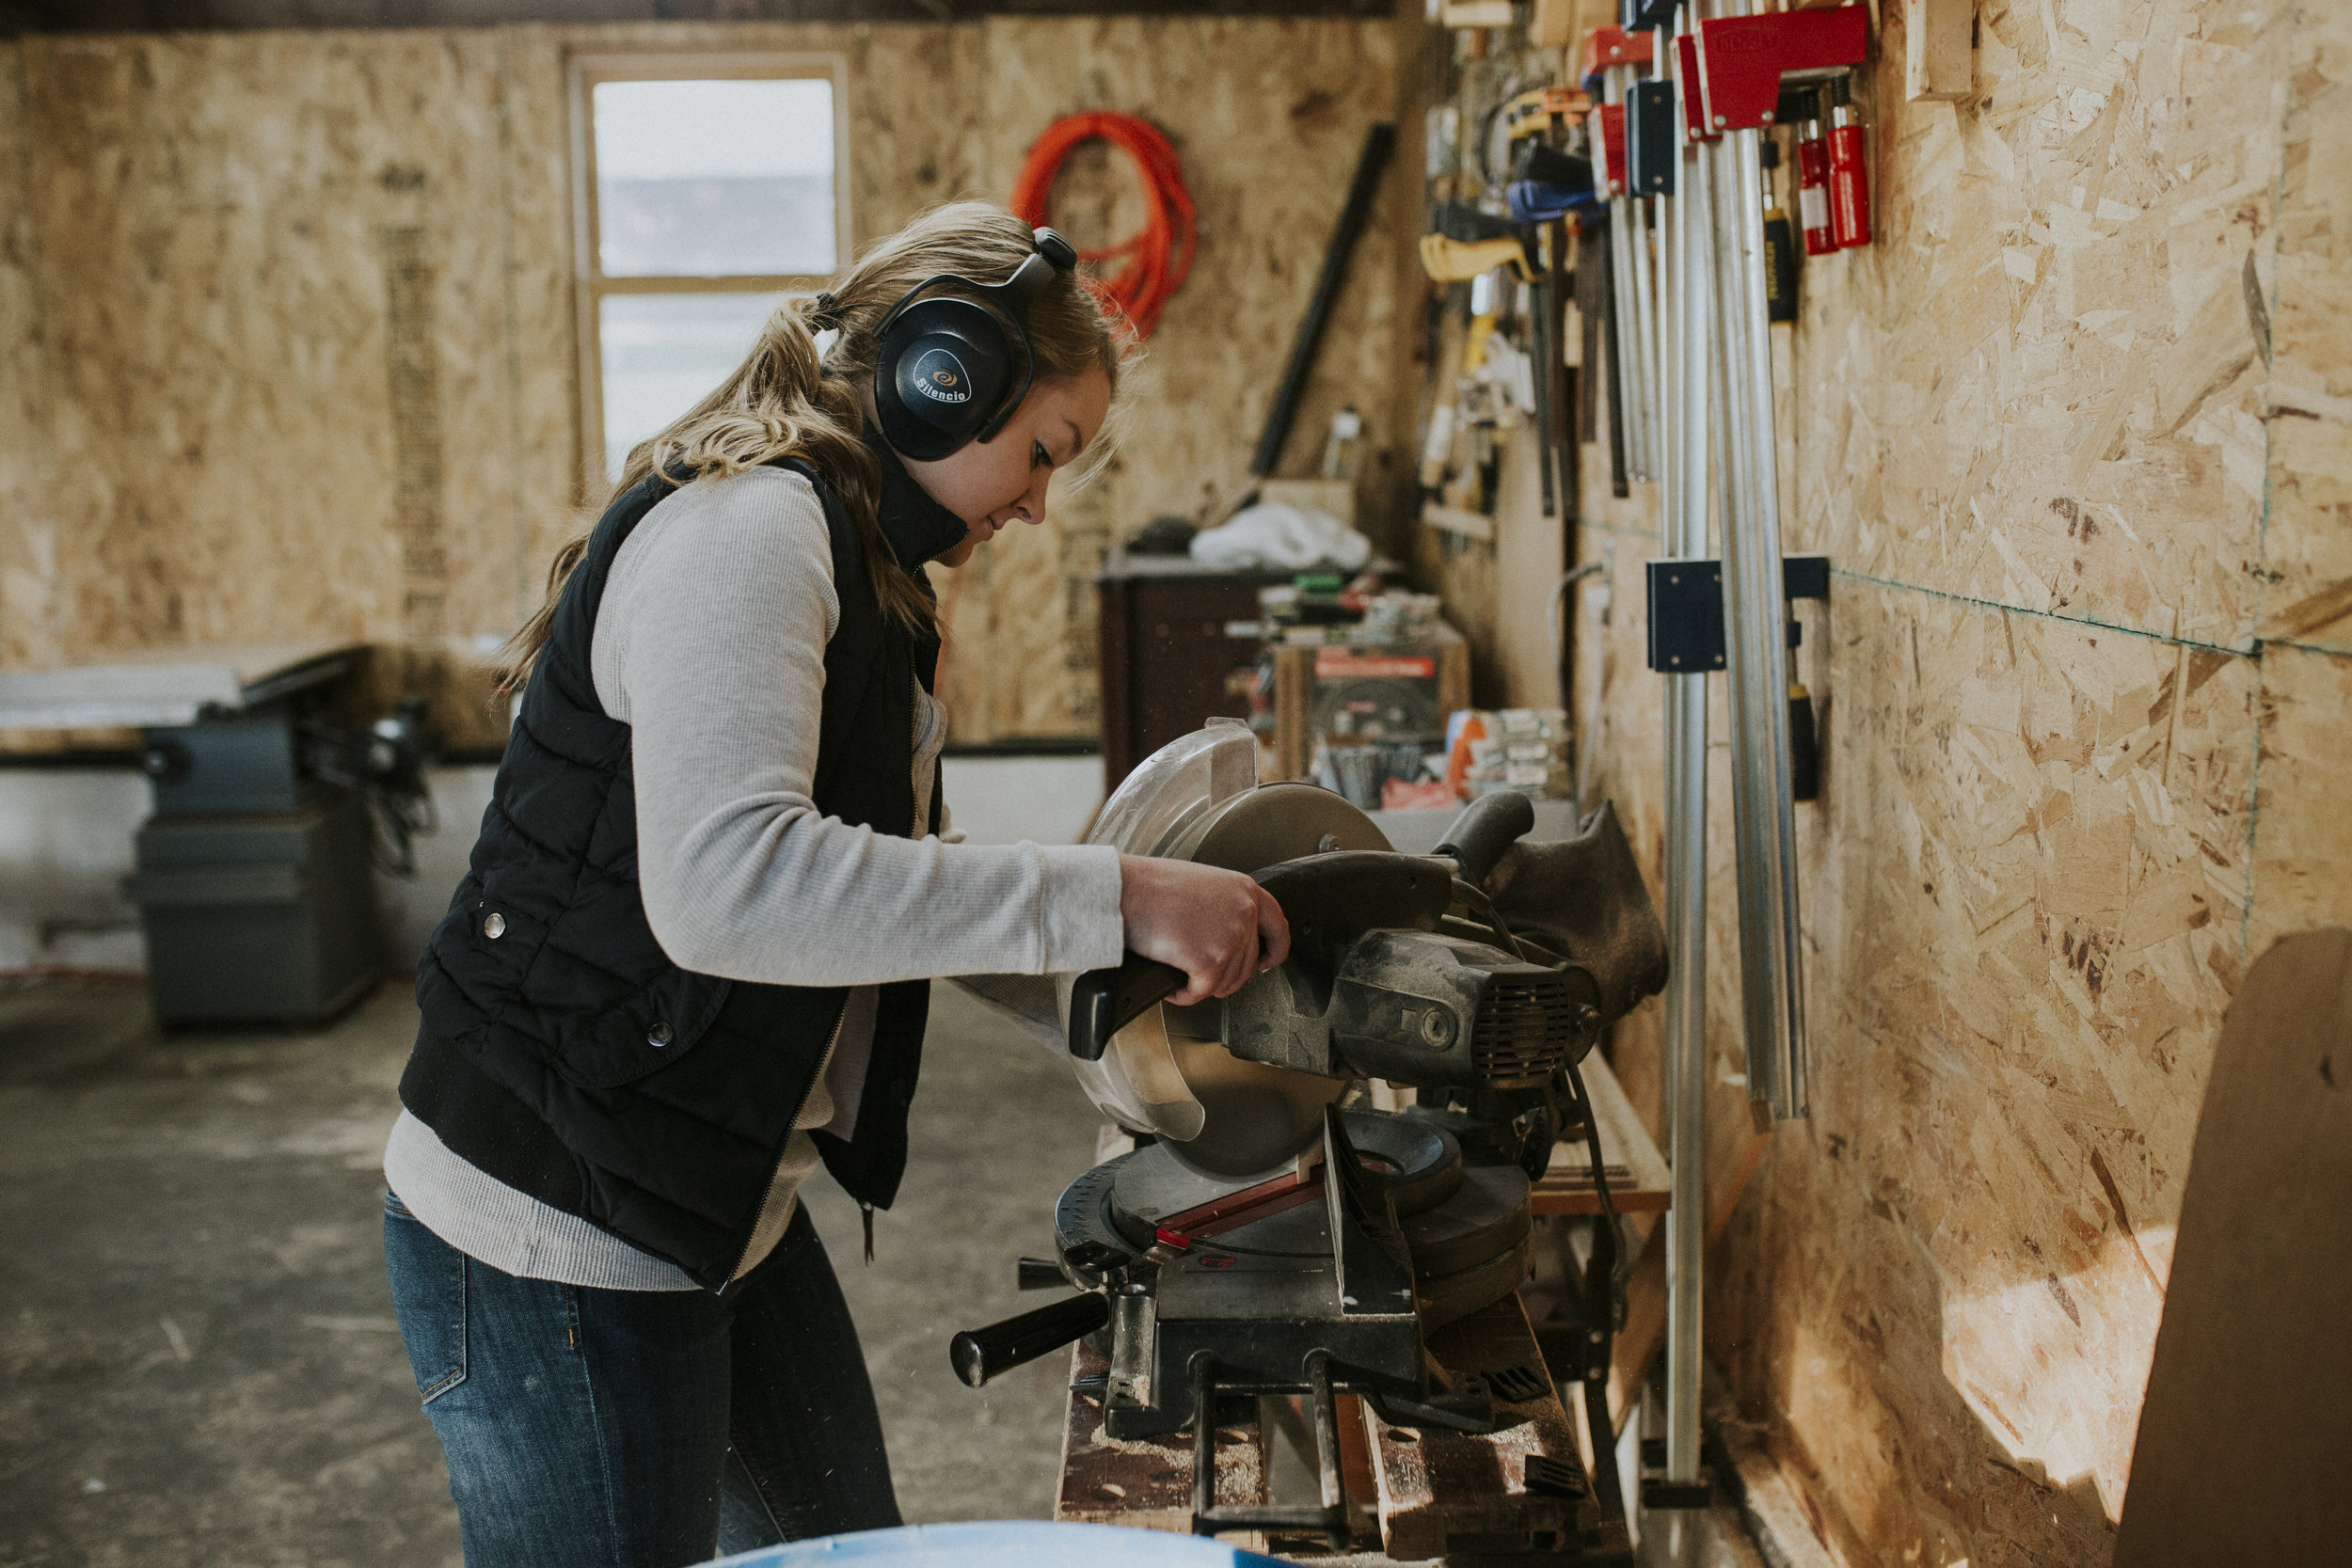 what it's like being a woman woodworker - the victories and struggles